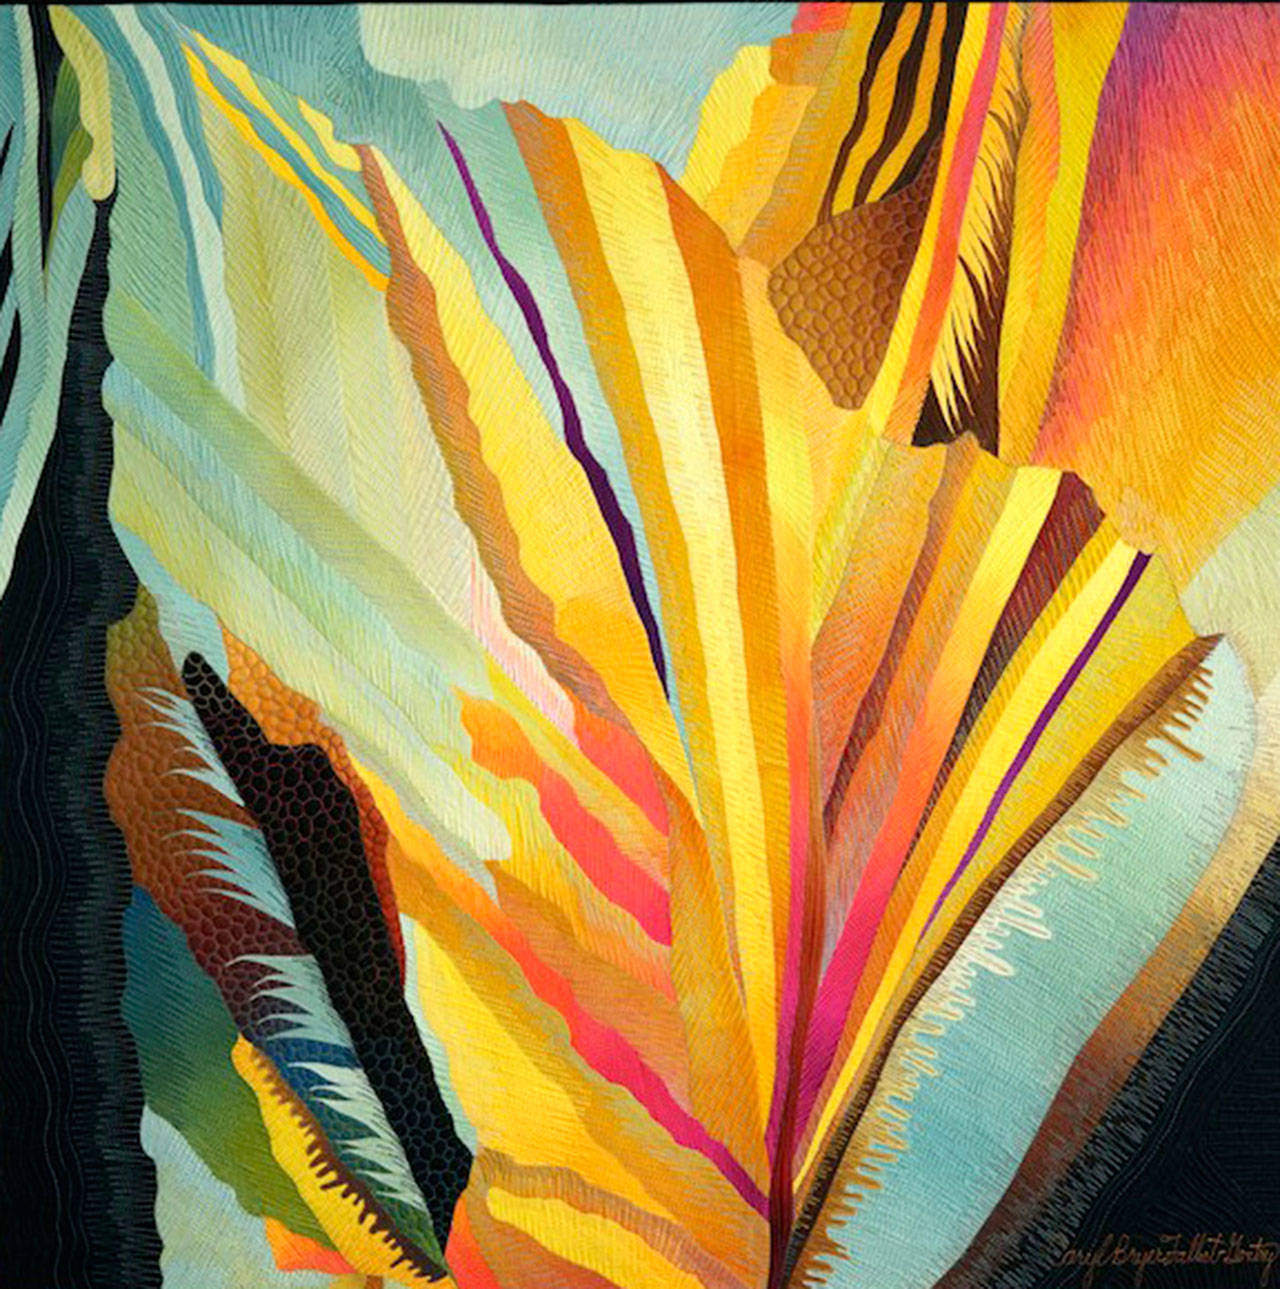 Caryl Bryer Fallert-Gentry’s quilted “Citric Abstraction” is a designinspired by citric acid crystals photographed under a microscope. Gentry says it looked like an abstract expressionist painting.She reinterpreted the concept of paper piecing and construction in the quilt world, and this is an excellent example of her process. In the quilting, she used dozens of different colors of thread, shading each area with at least two different colors, often contrasting with the colors underlying fabrics. The quilting zigzags in straight lines suggest the crystalline structure that inspired the design.